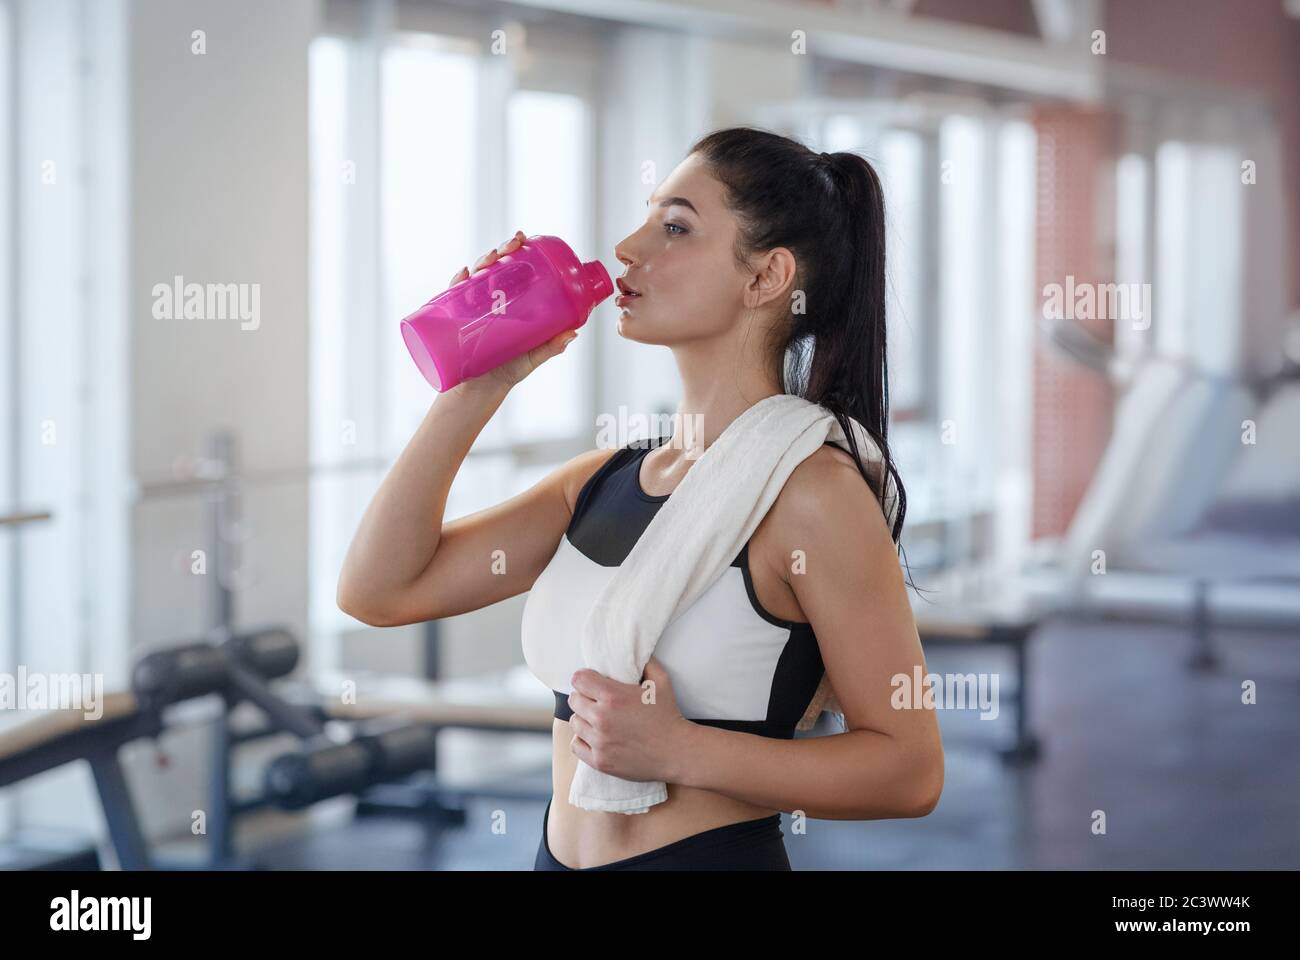 Beautiful woman resting after gym workout holding a plastic water